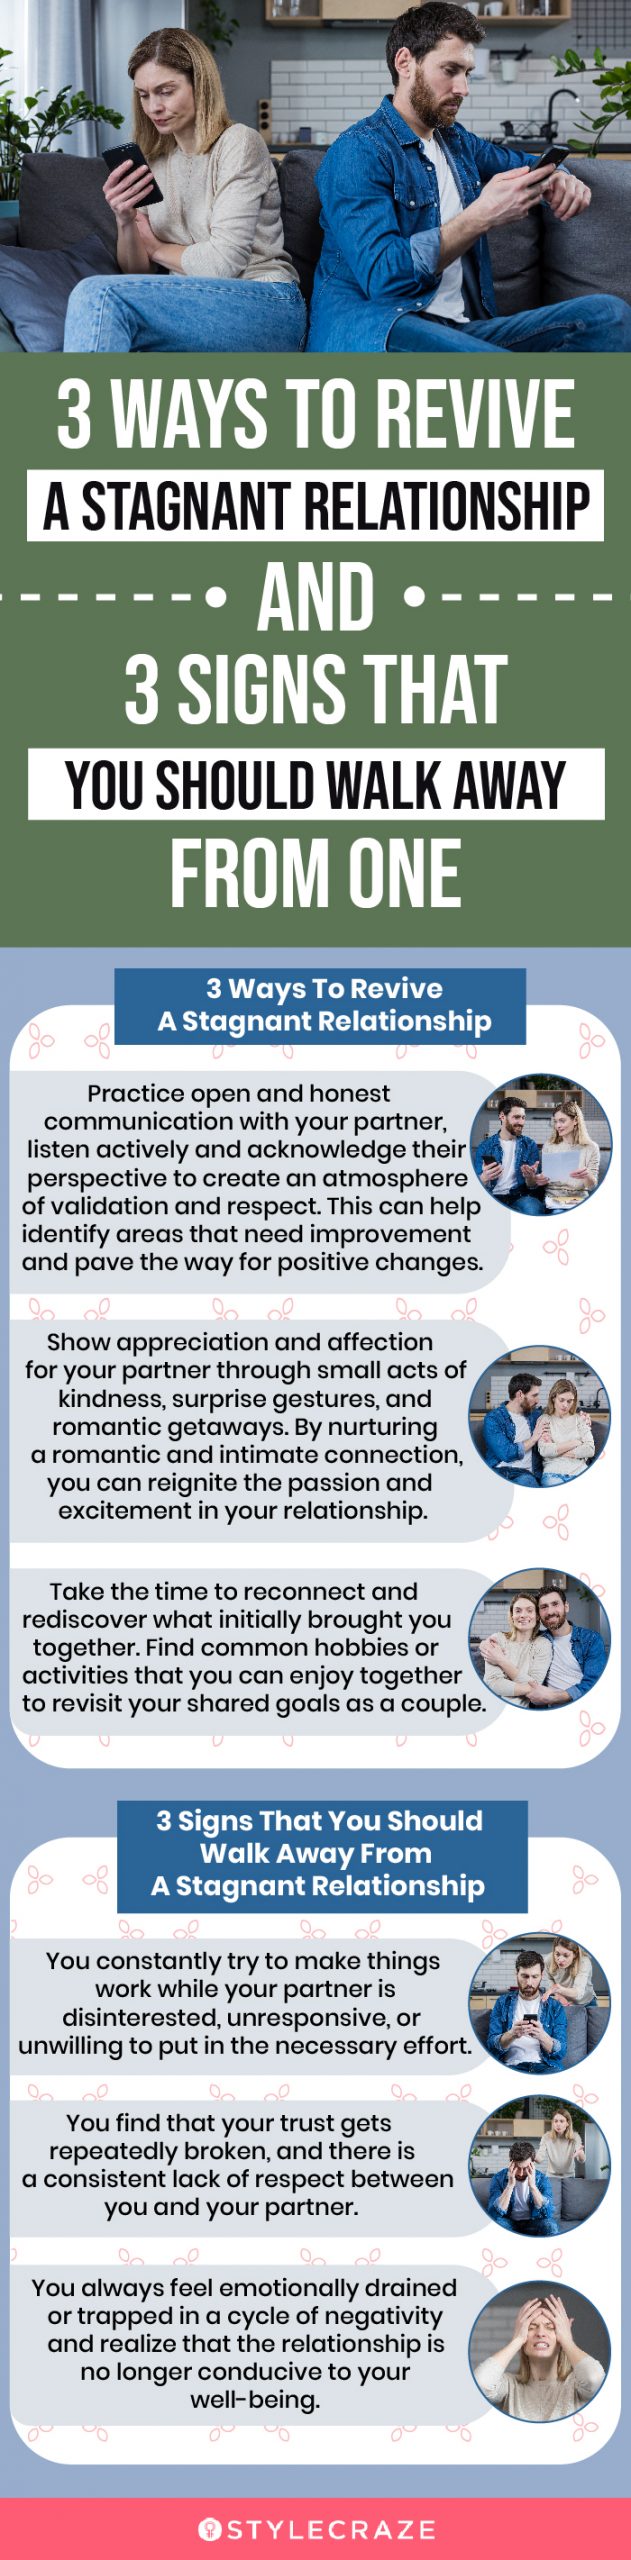 3 ways to revive a stagnant relationship and 3 signs that you should walk away from one (infographic)